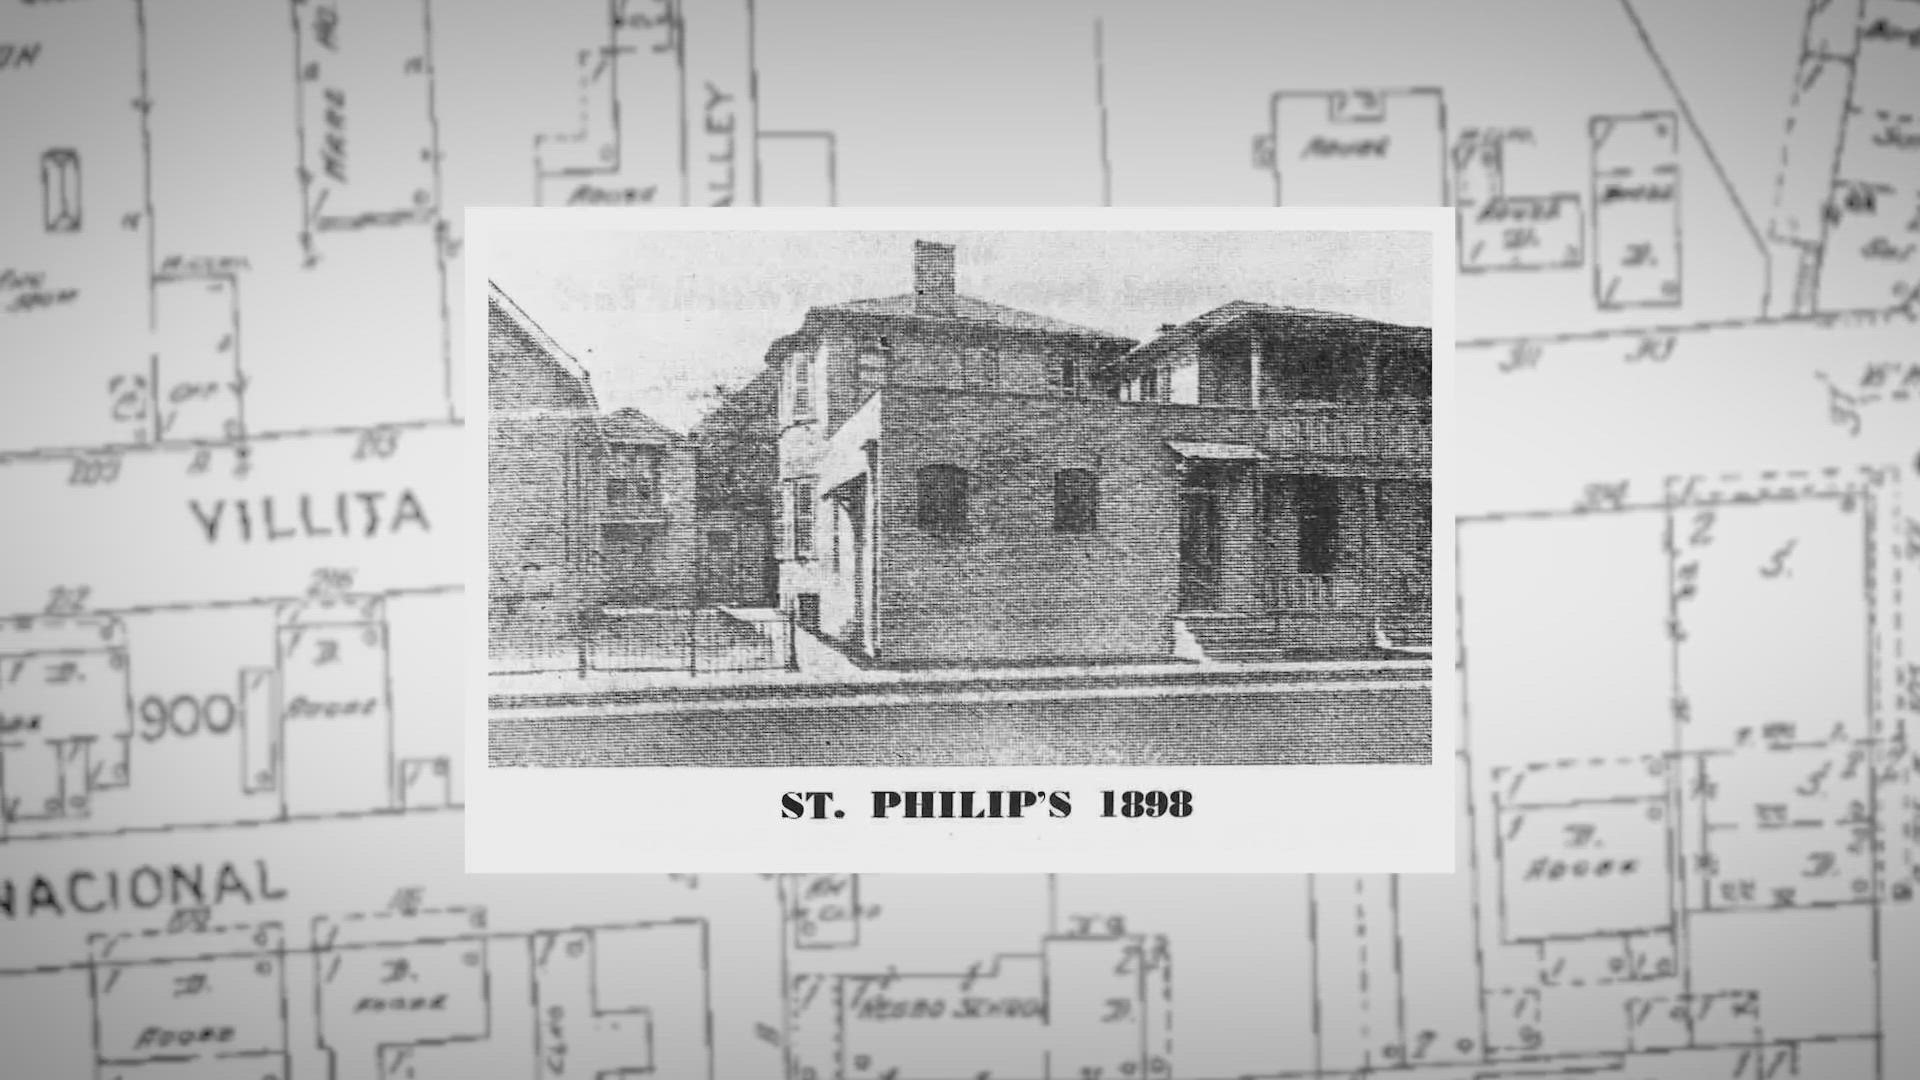 St. Philip's College's history continues to evolve. But how long will its longtime president grow with it? She has an answer.